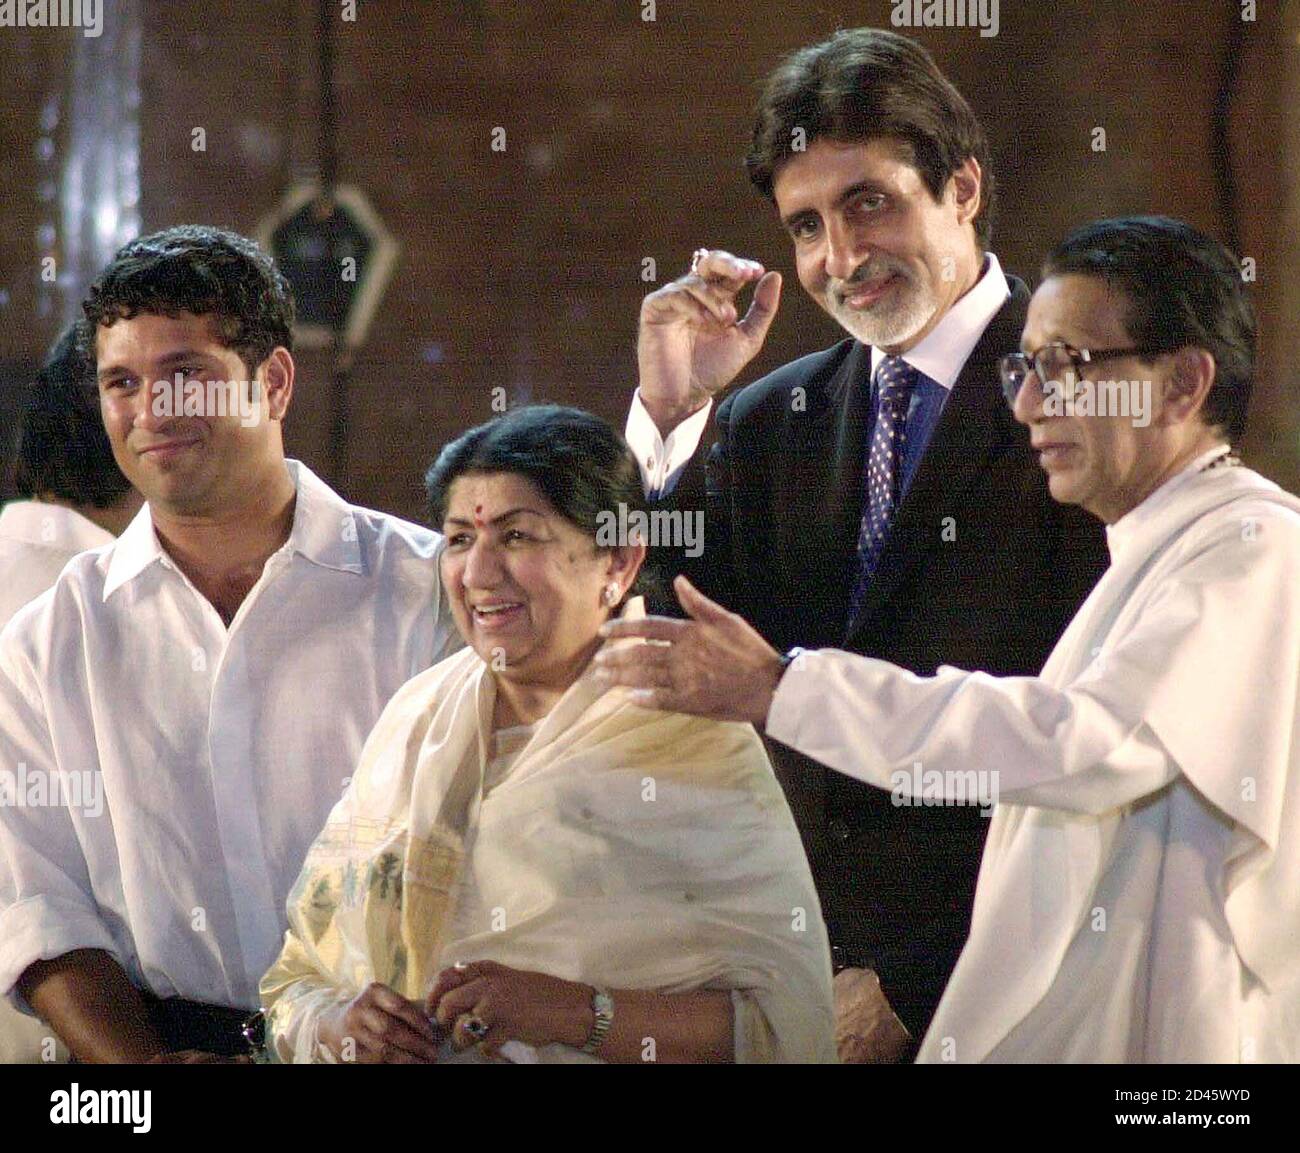 Indian celebrities (L to R) cricketer Sachin Tendulkar, singer Lata  Mangeshkar, Bollywood actor Amitabh Bachchan and leader of the militant  right-wing Shiv Sena Party Bal Thackeray appear during a concert in Bombay,